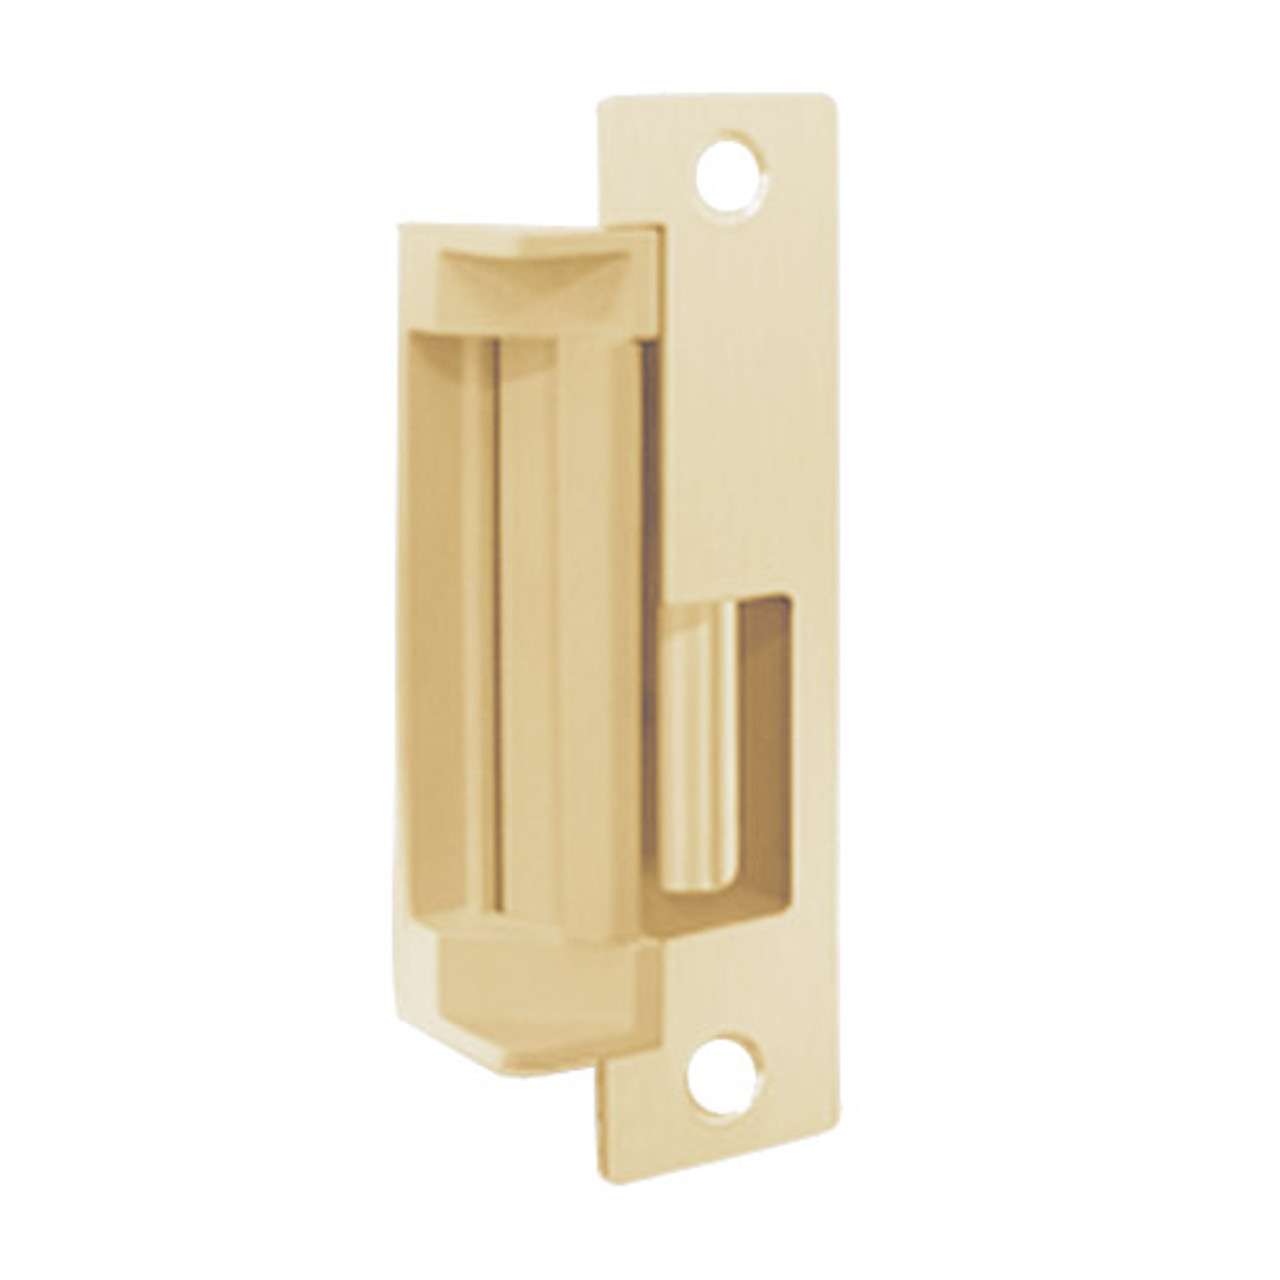 4500C-606-LBSM Hes Electric Strike with Latchbolt strike monitor in Satin Brass Finish